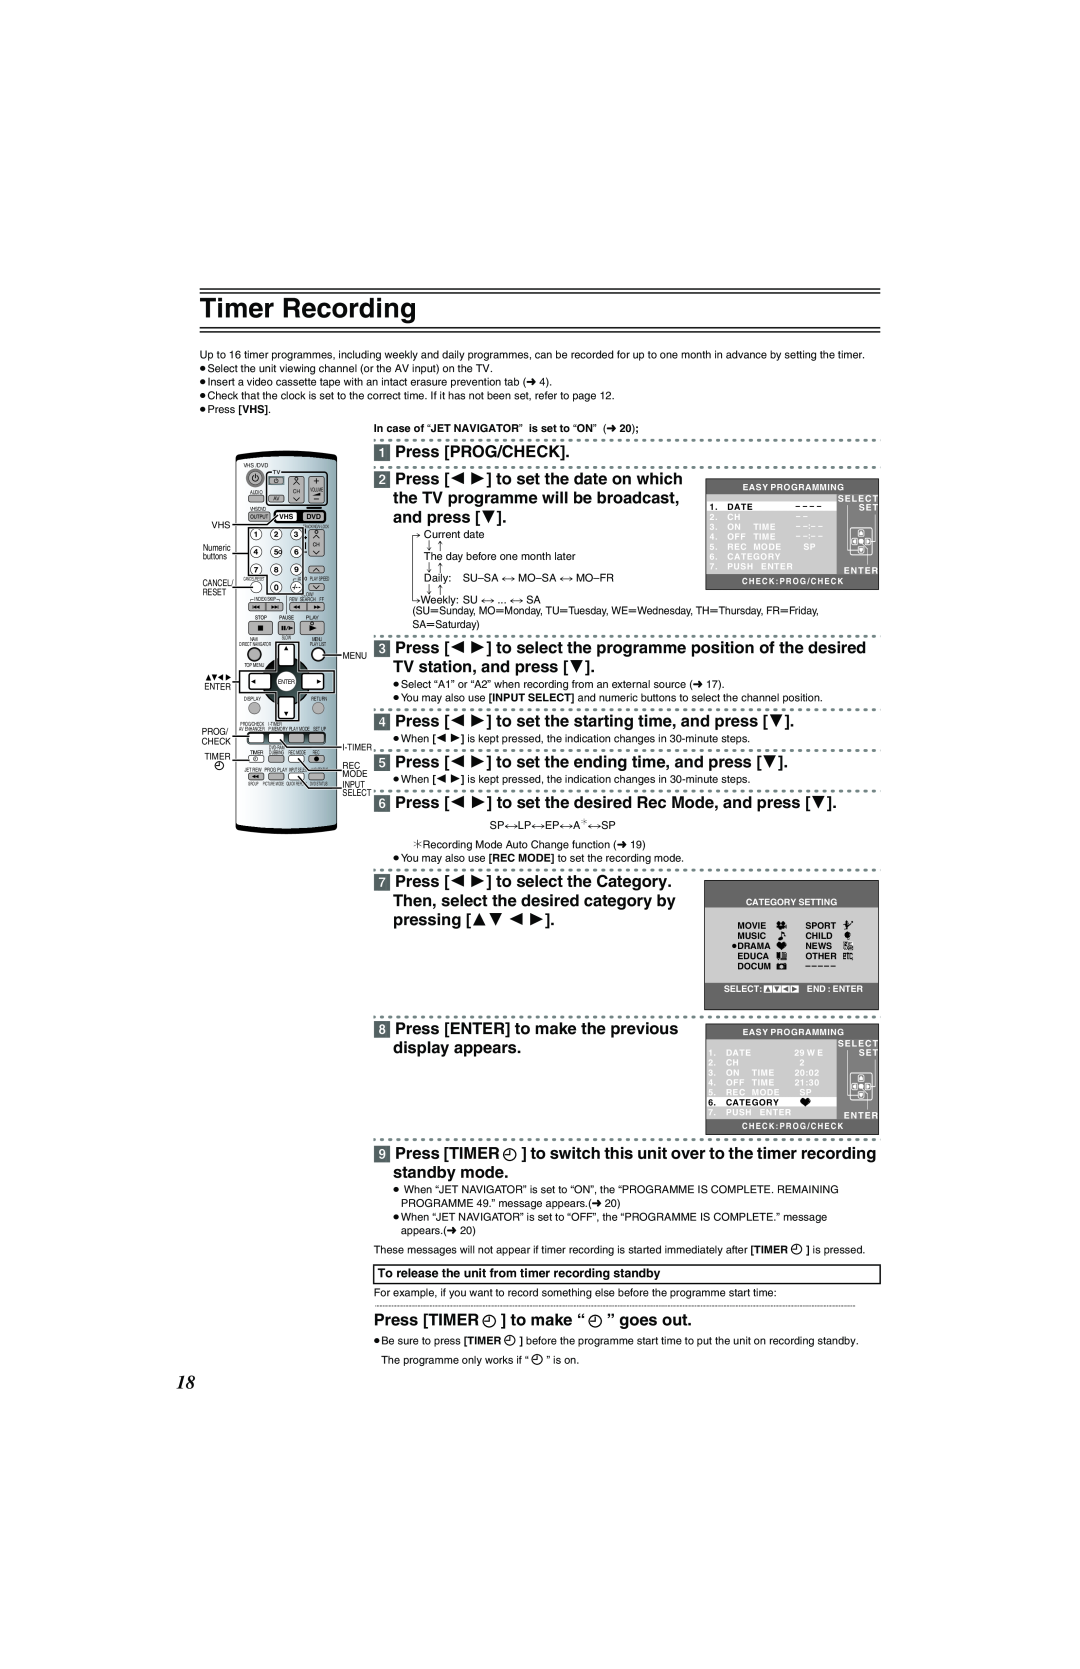 Panasonic NV-VP32 Series Timer Recording, Press PROG/CHECK, Press 2 1 to set the date on which, and press, A. Current date 